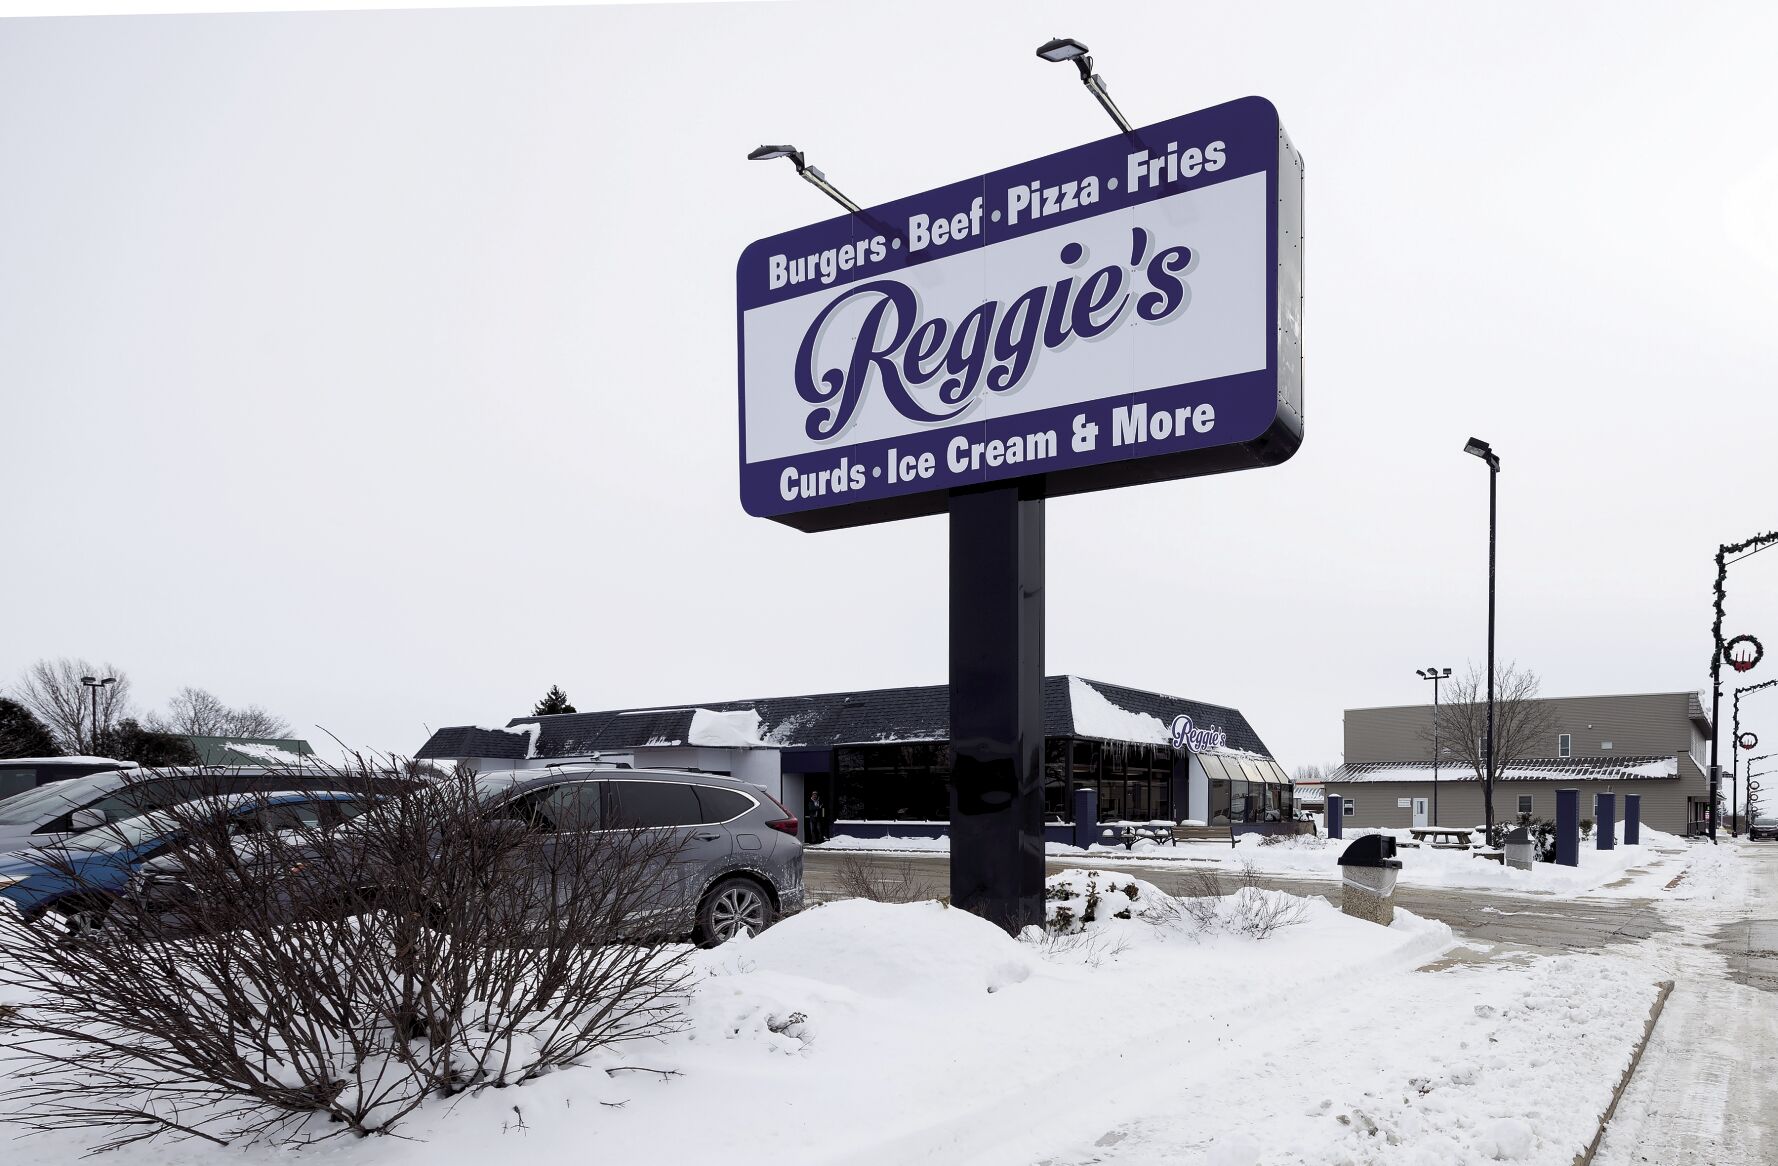 Reggie’s is located at 645 Lincoln Ave. in Fennimore, Wis.    PHOTO CREDIT: Stephen Gassman